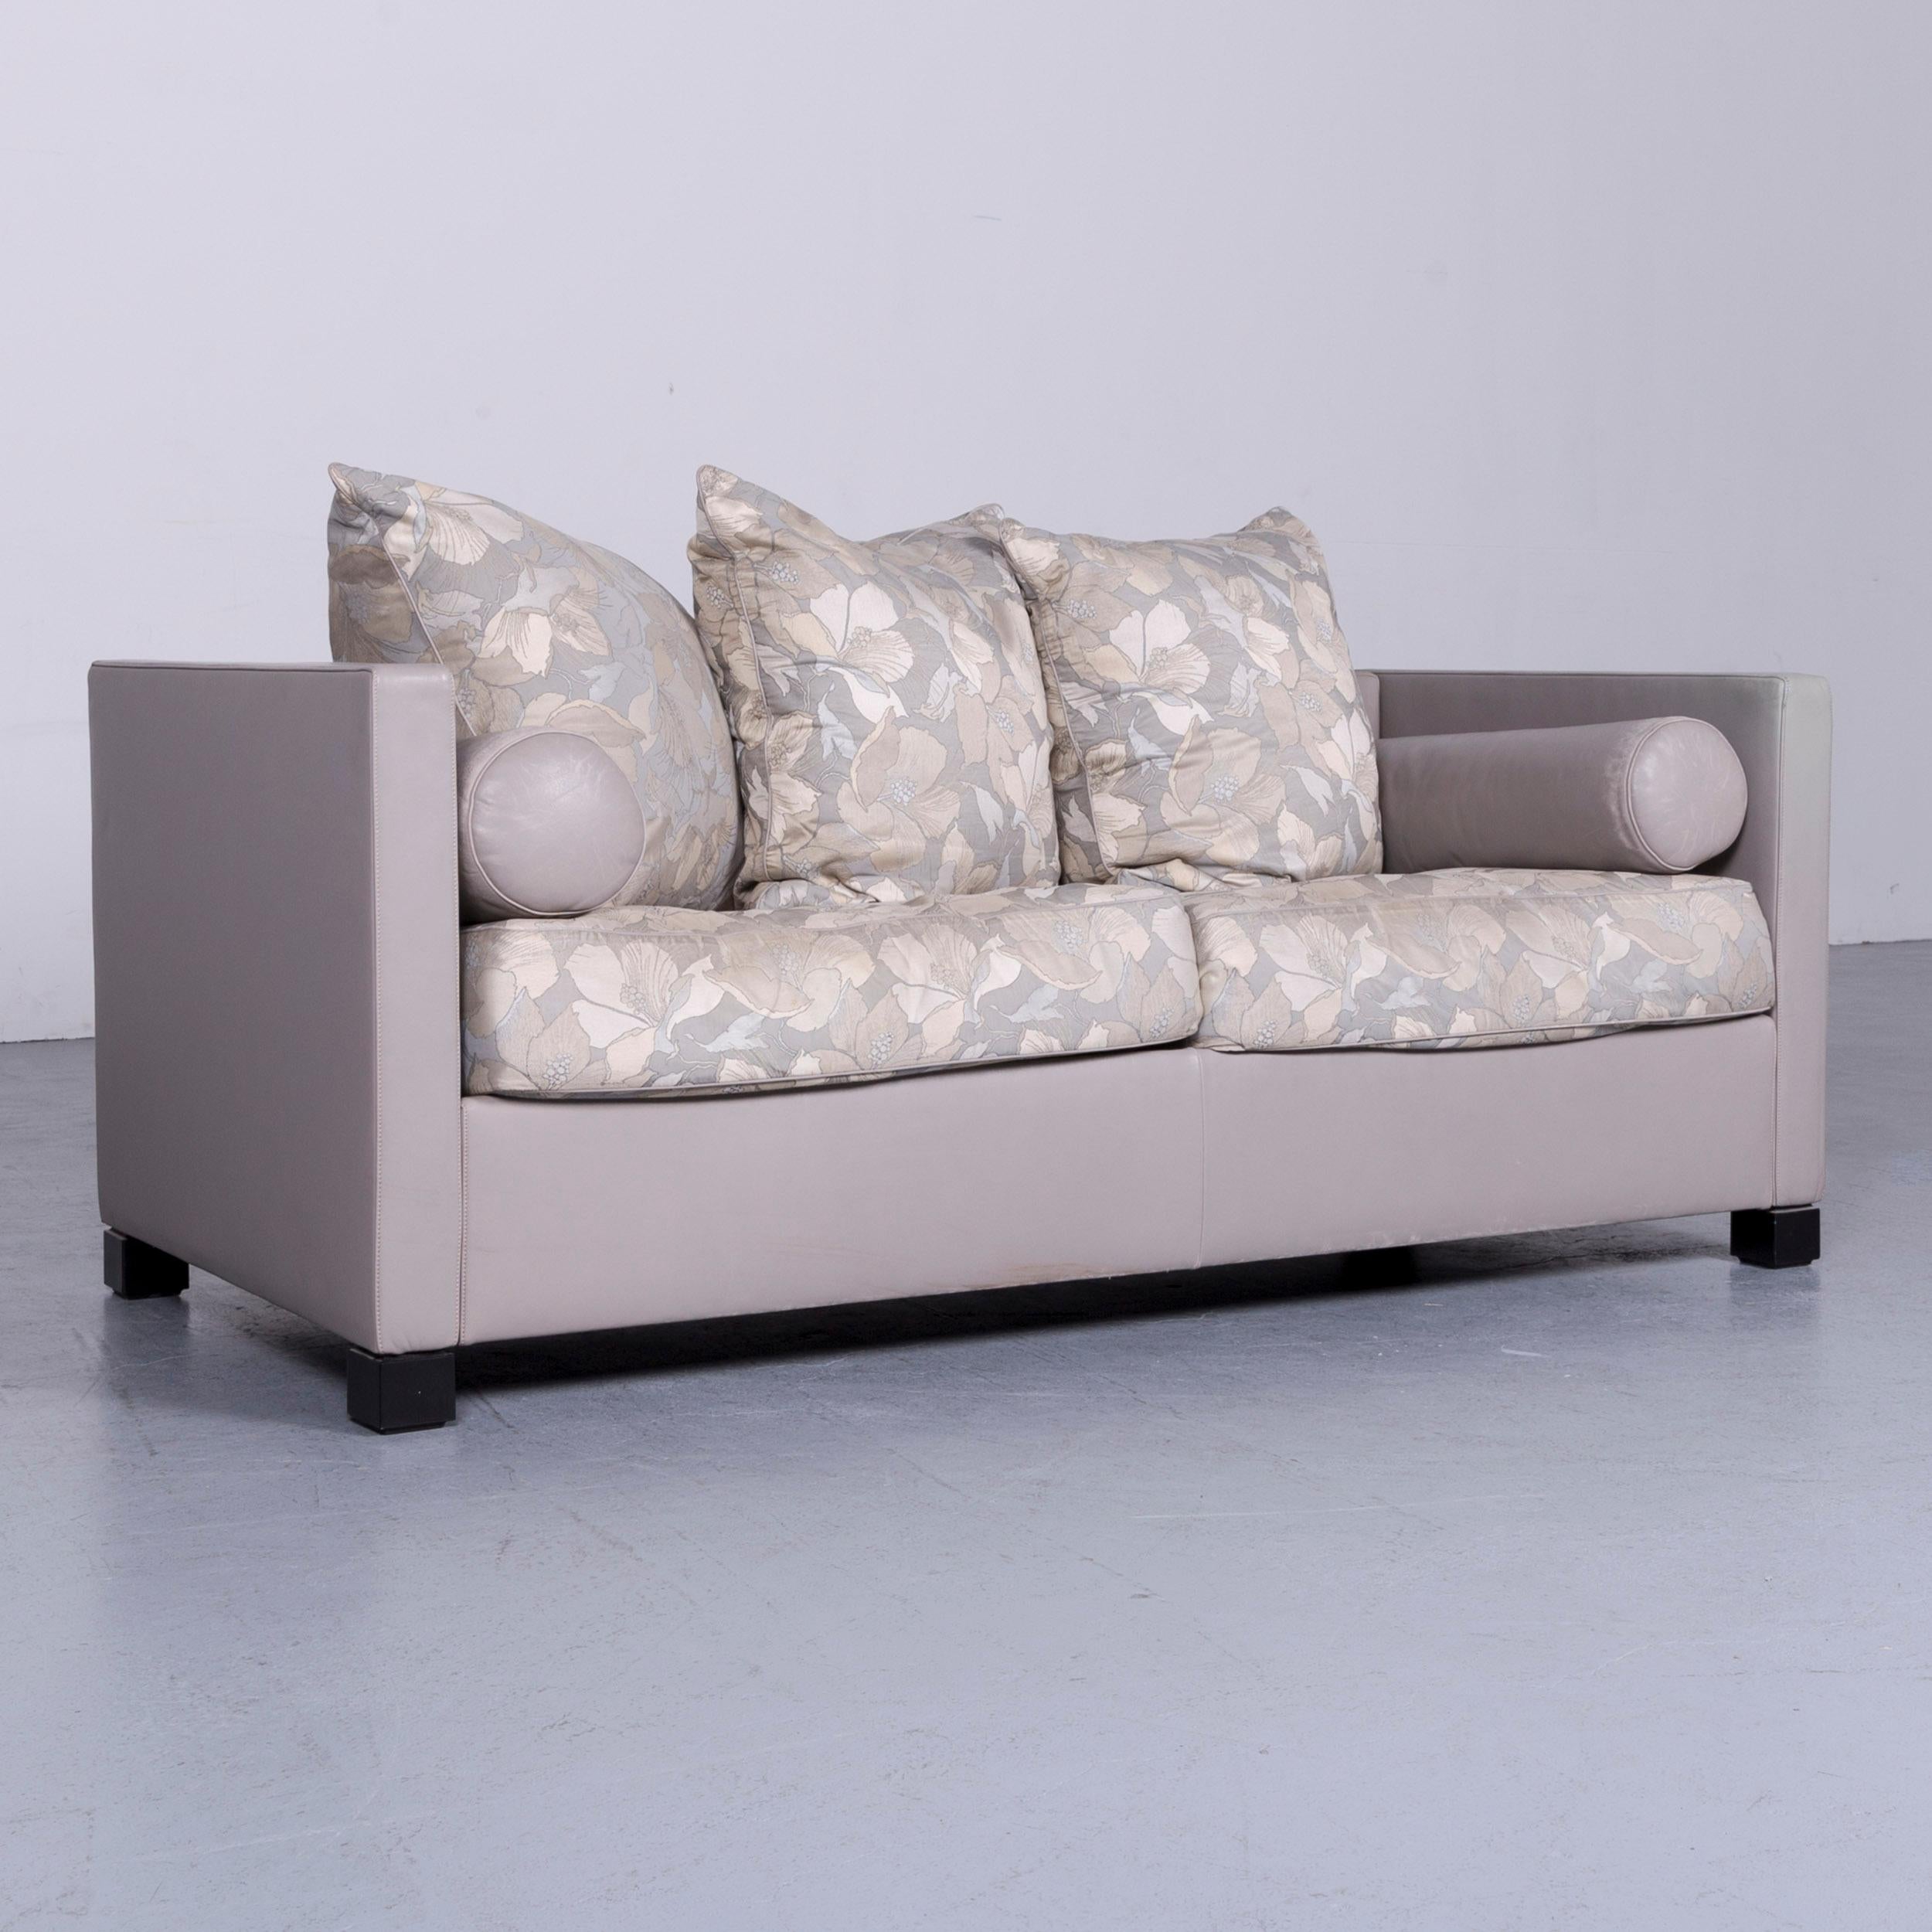 We bring to you an De Sede 3000 Edition designer leather fabric sofa grey two-seat couch.